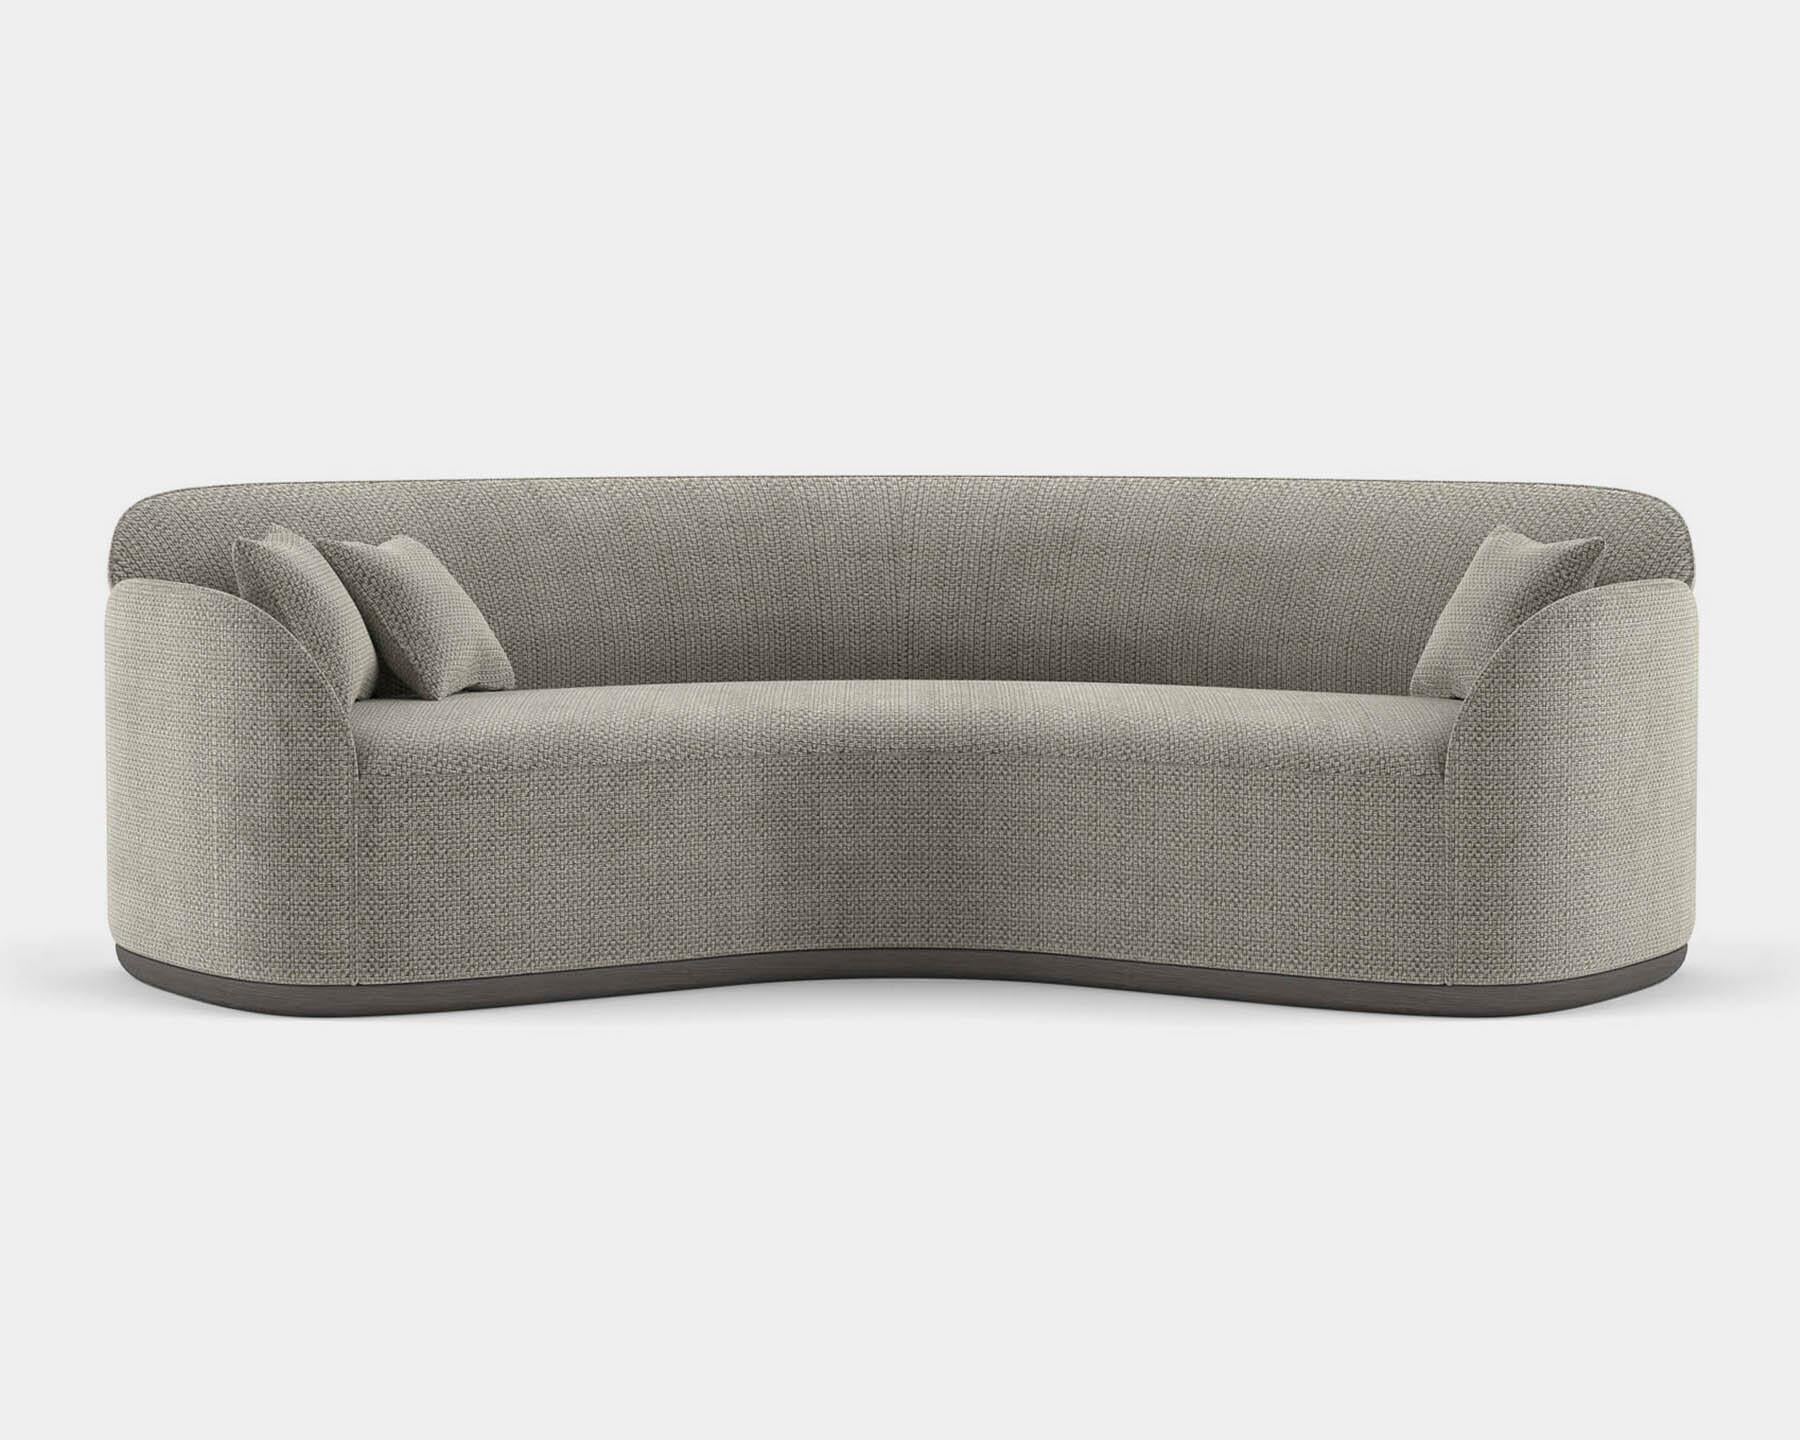 Contemporary Curved Sofa 'Unio' by Poiat, Hanoi 04 by Pierre Frey For Sale 3